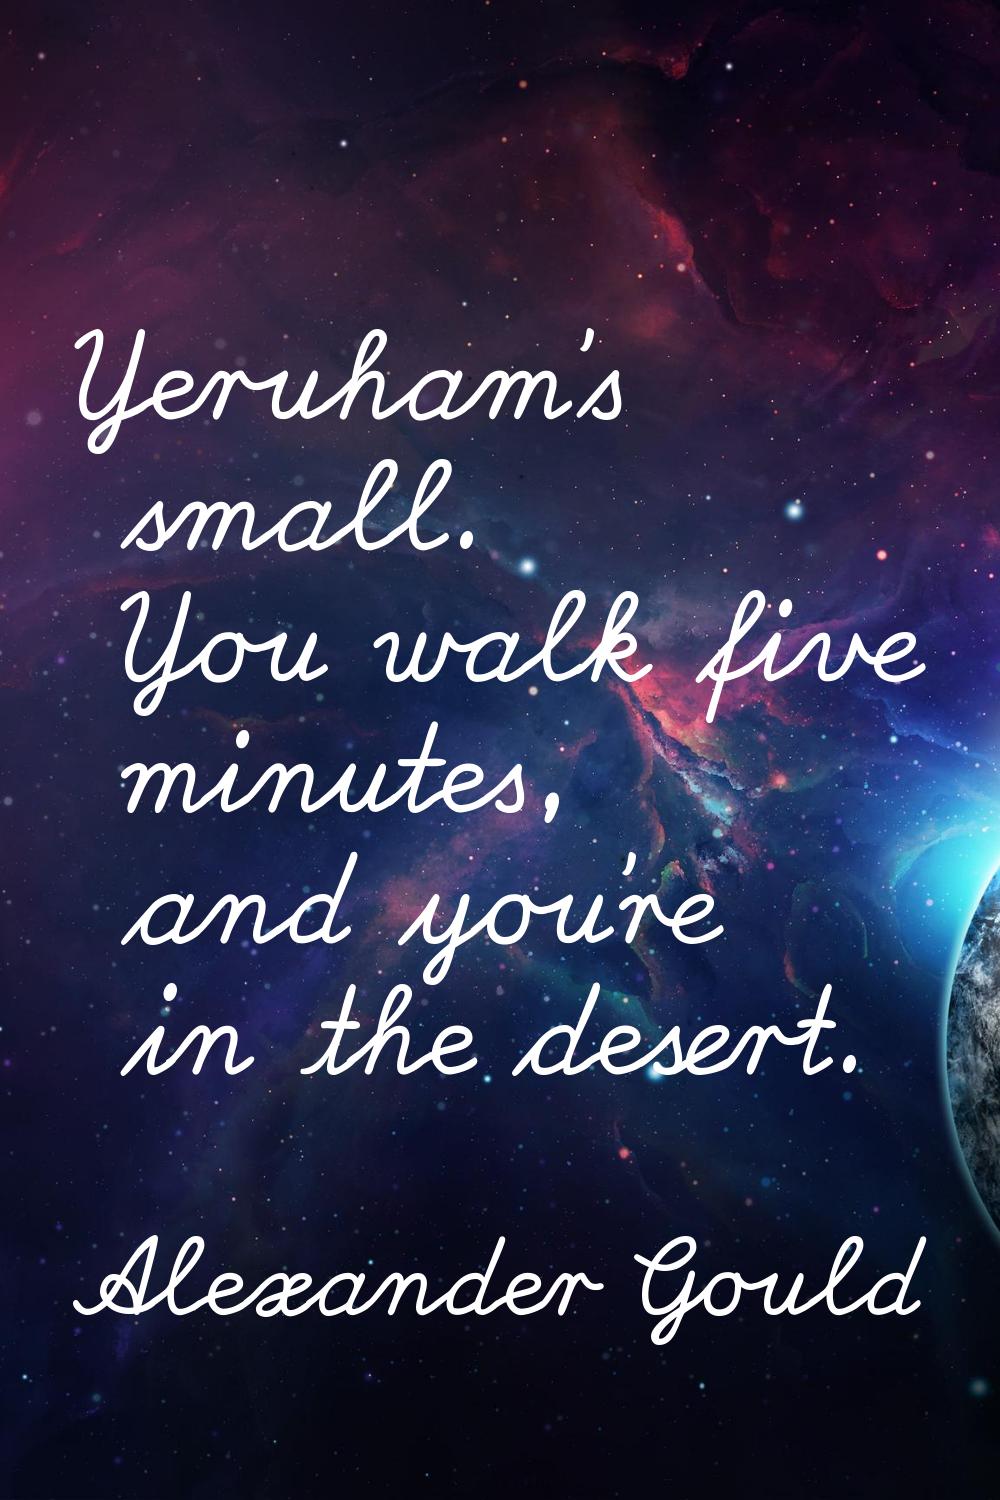 Yeruham's small. You walk five minutes, and you're in the desert.